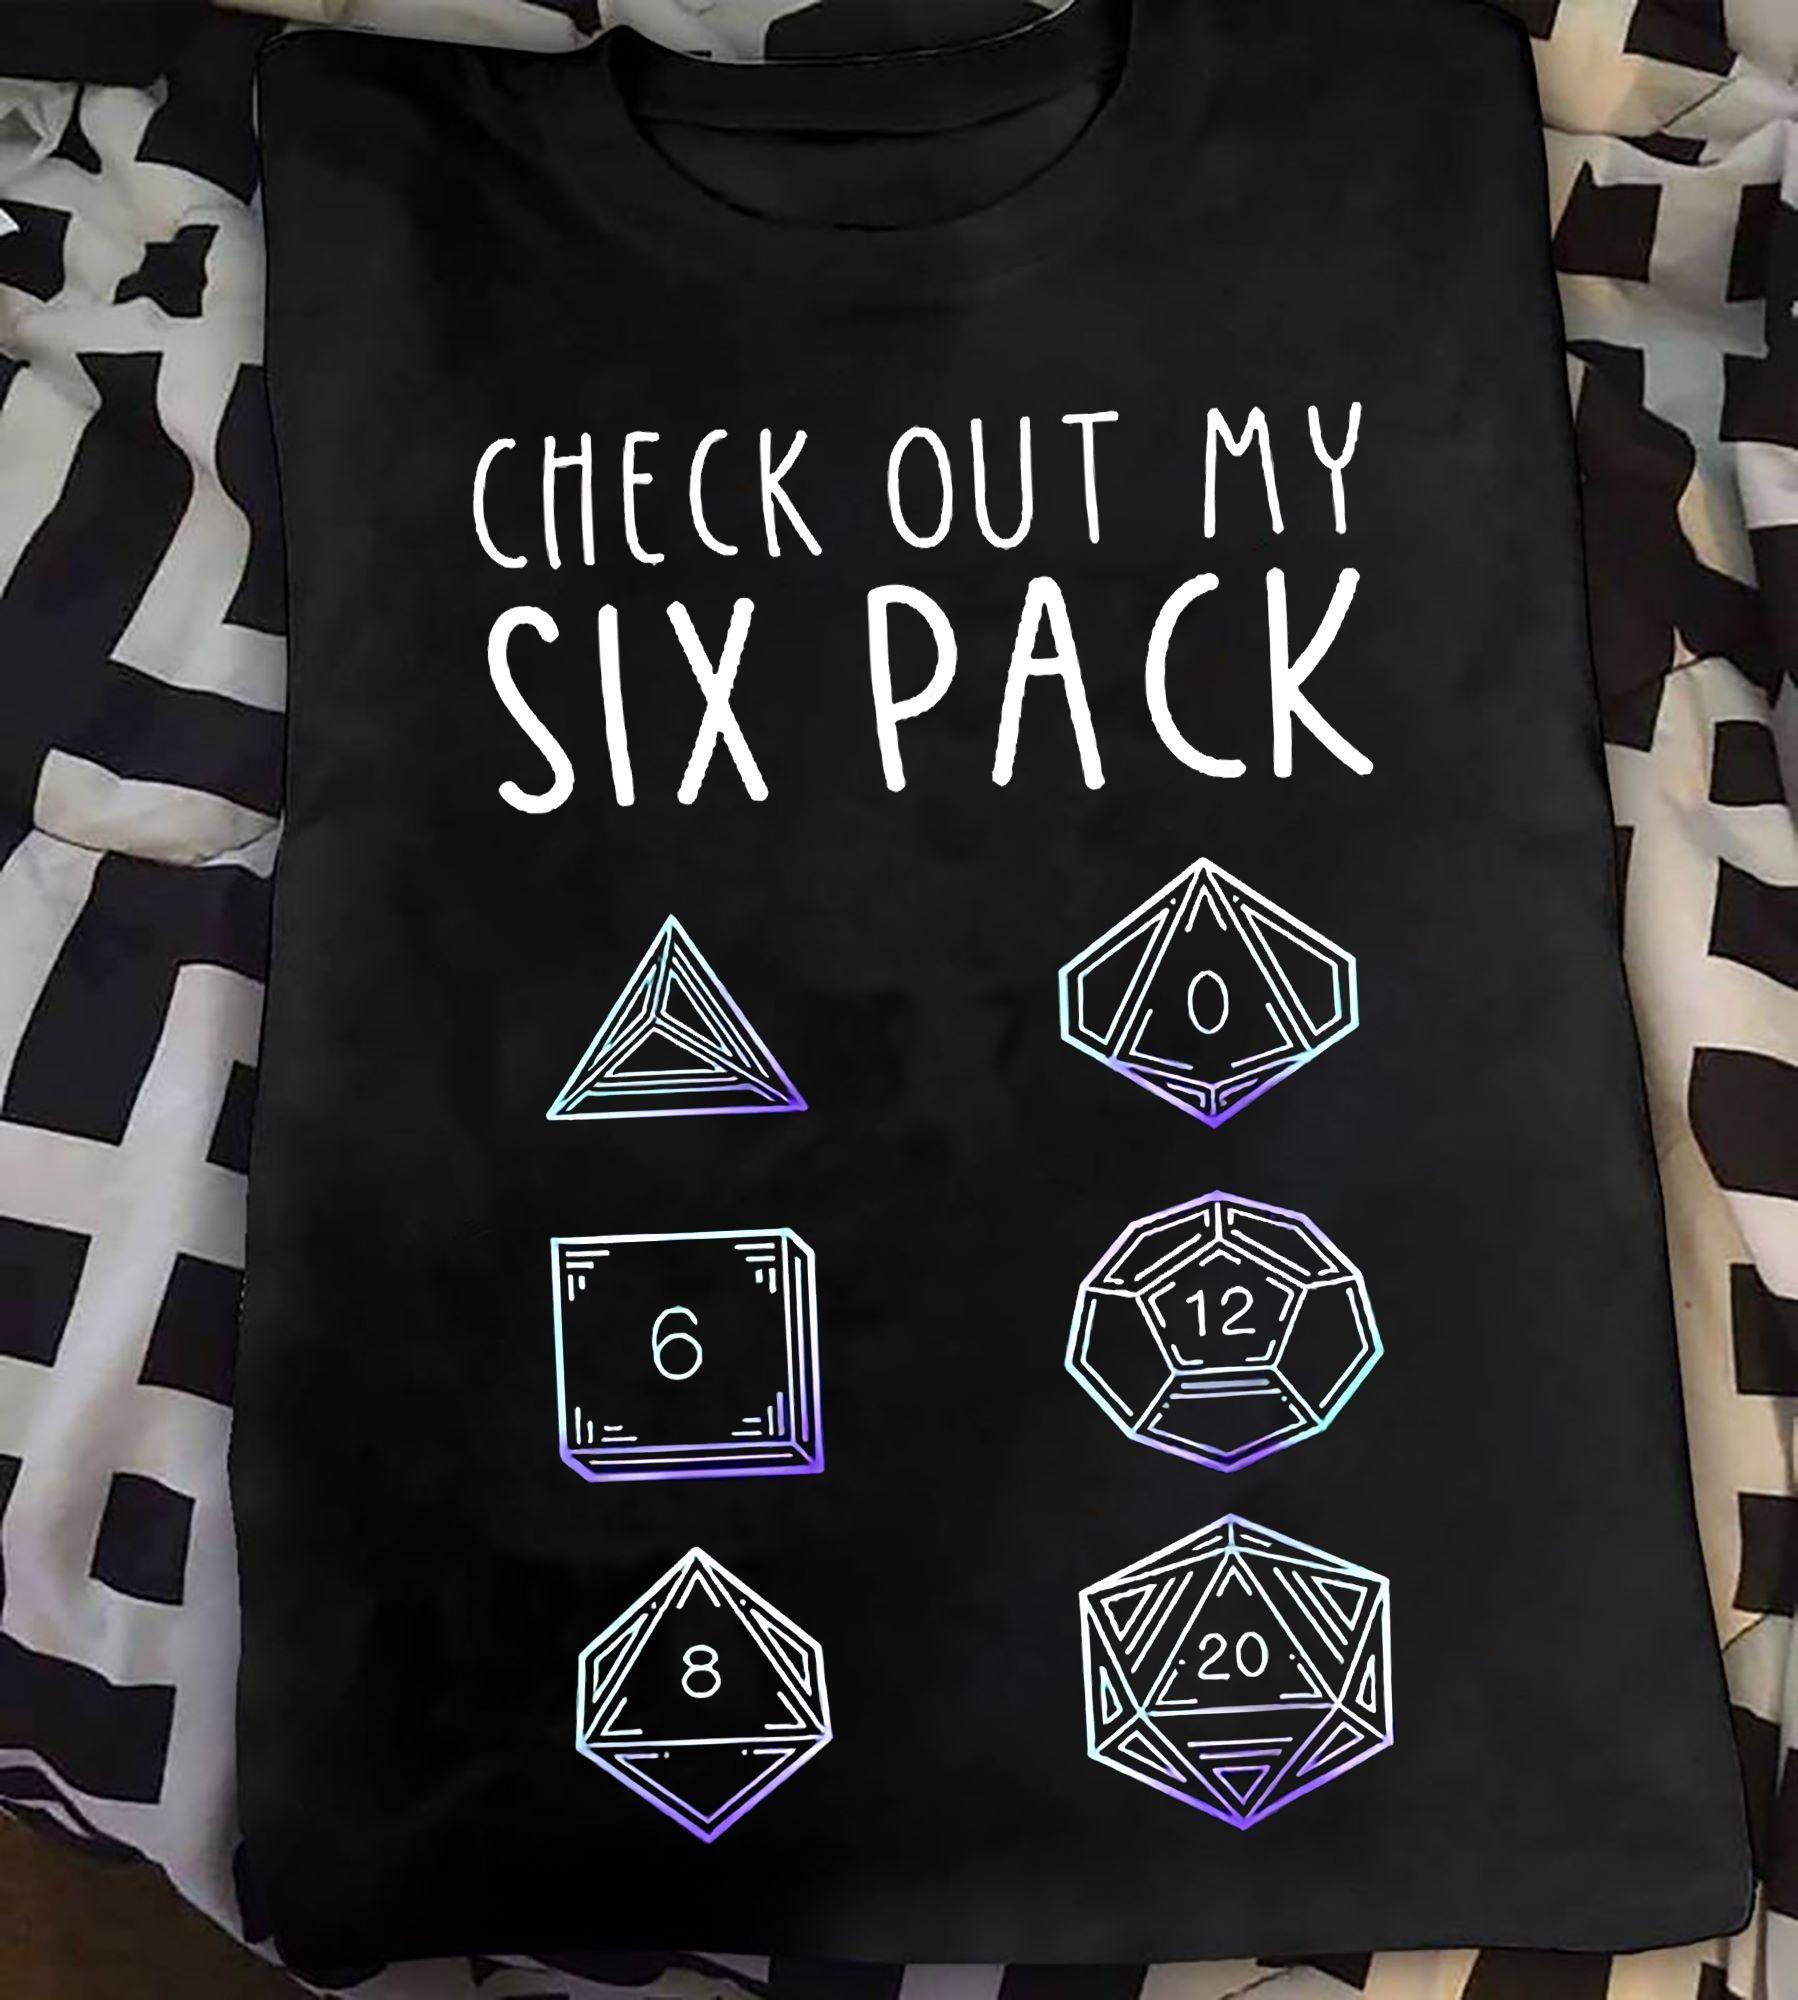 Check out my six pack - Six pack dices, Dungeons and Dragons